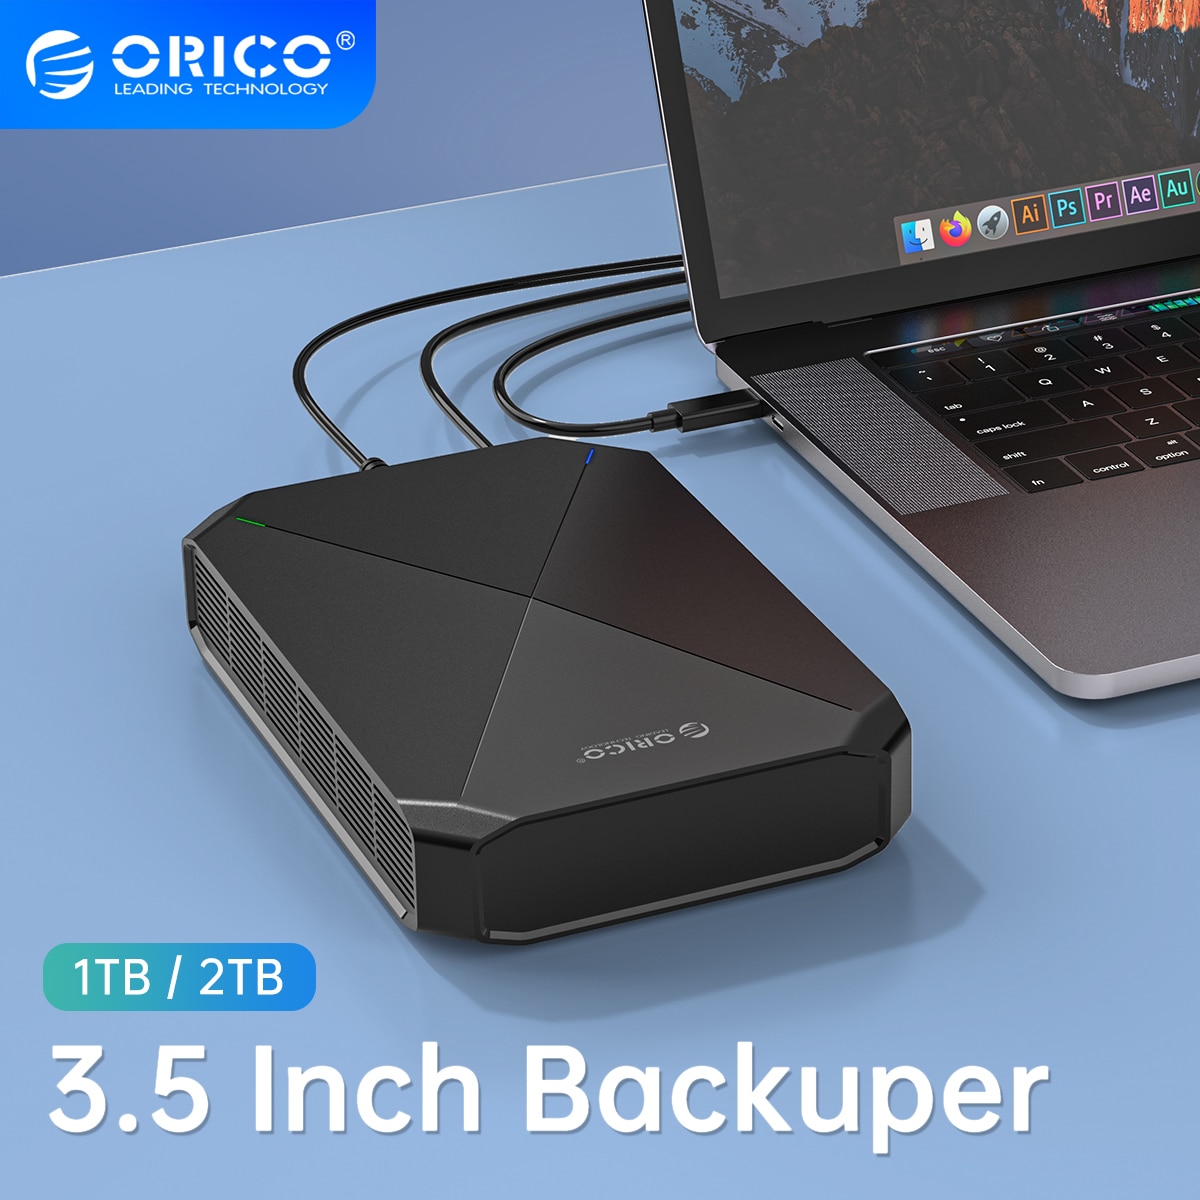 ORICO 3.5 inch Desktop Data Backup 3.5'' Backuper Backup Android Phone to PC Laptop Mac Backup Whatsapp with HDD Backup and Sync